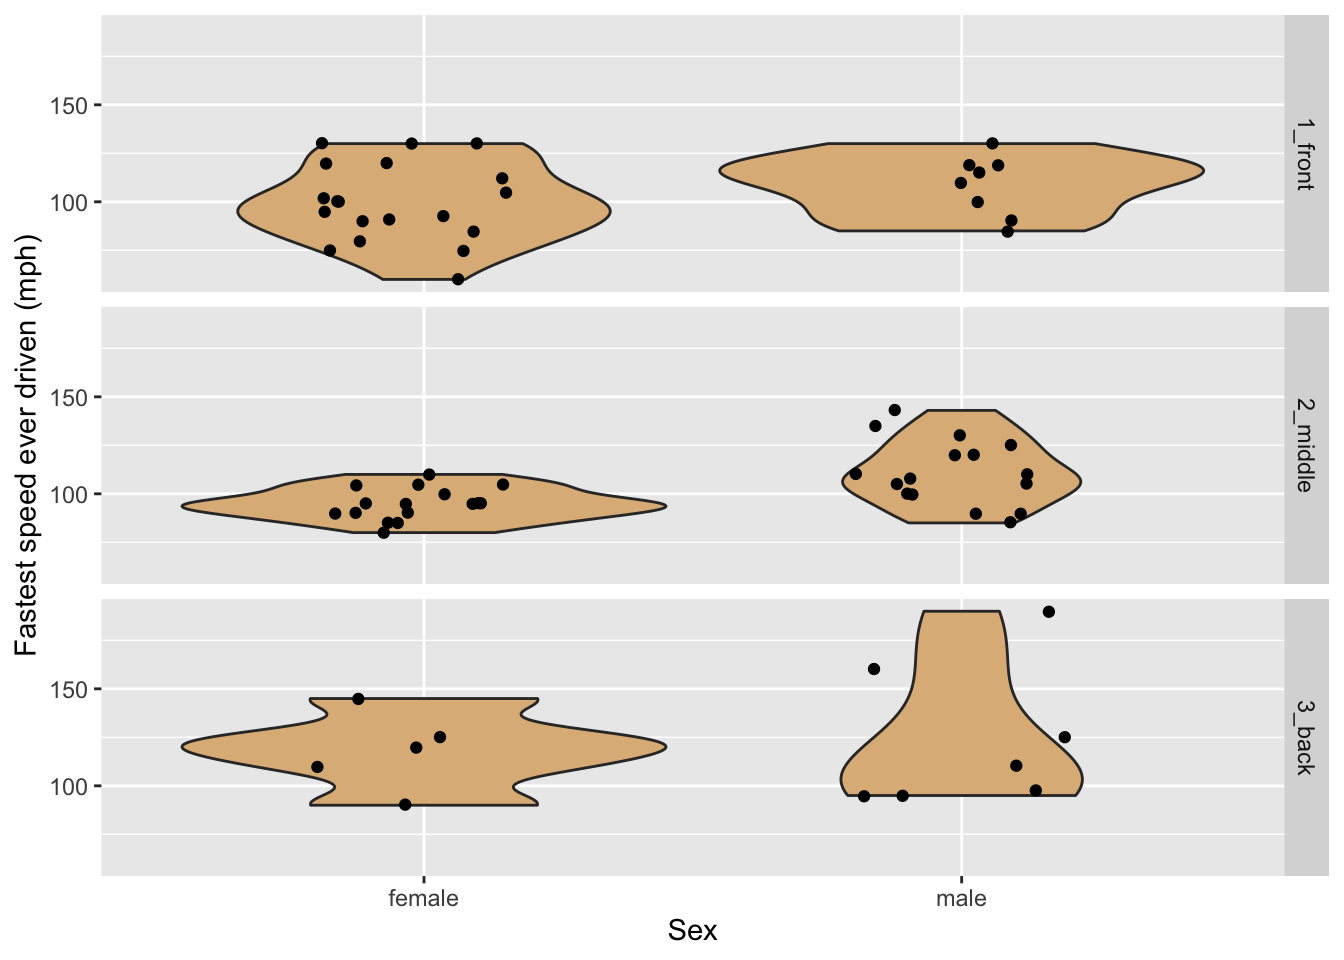 Violin plots of the fastest speed ever driven, by sex and seating preference.